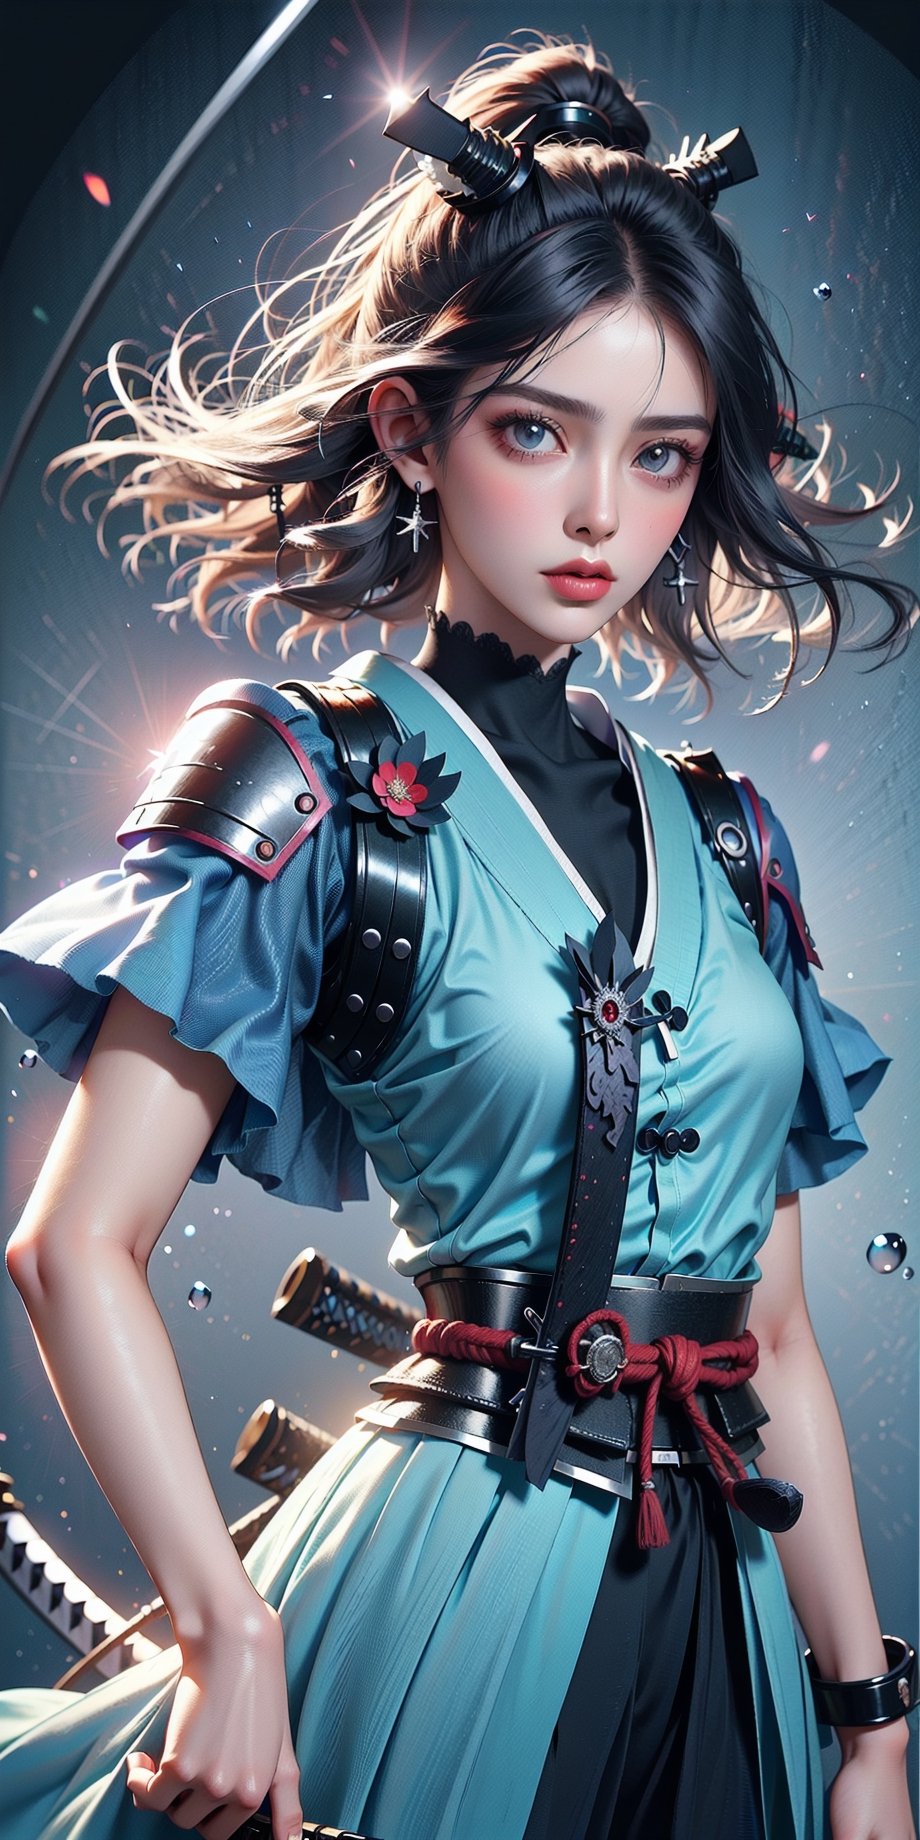 1girl is standing in a dark and mysterious environment.(((hang Beautiful, delicate and perfectly curved Japanese samurai katana  sword))) The scene is lit by a single light source, creating a sense of tension and suspense. The character is wearing a suit and tie, and their face is obscured by shadows. The image is rendered in high detail, with realistic textures and materials. The overall effect is a visually stunning and thought-provoking image that is sure to keep viewers engaged.,cool,portrait,nodf_lora,mecha,1girl,makima,1 girl